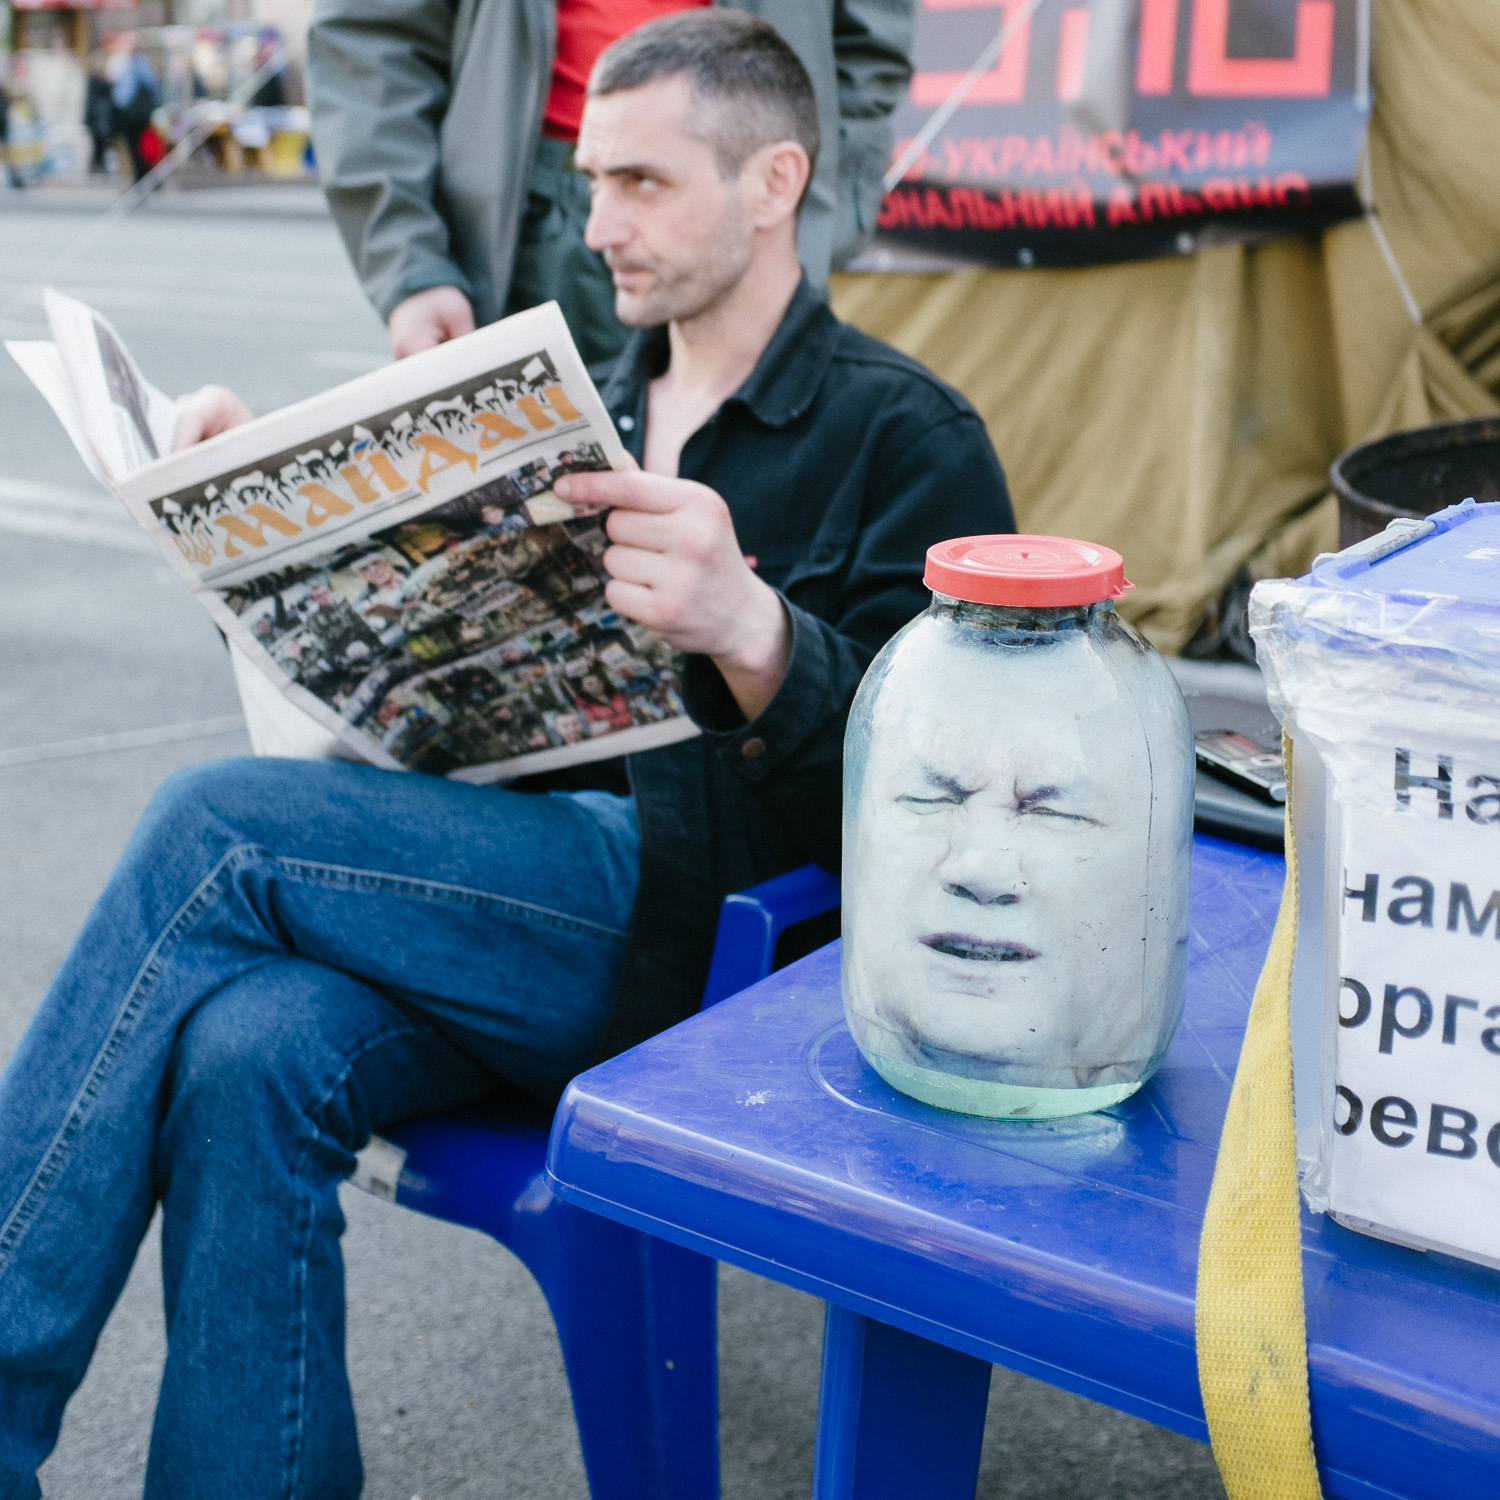  A man reads from a free newspaper reporting on the Euromaidan uprisings next to a replica head of former president Viktor Yanukovych in a sealed jar. 